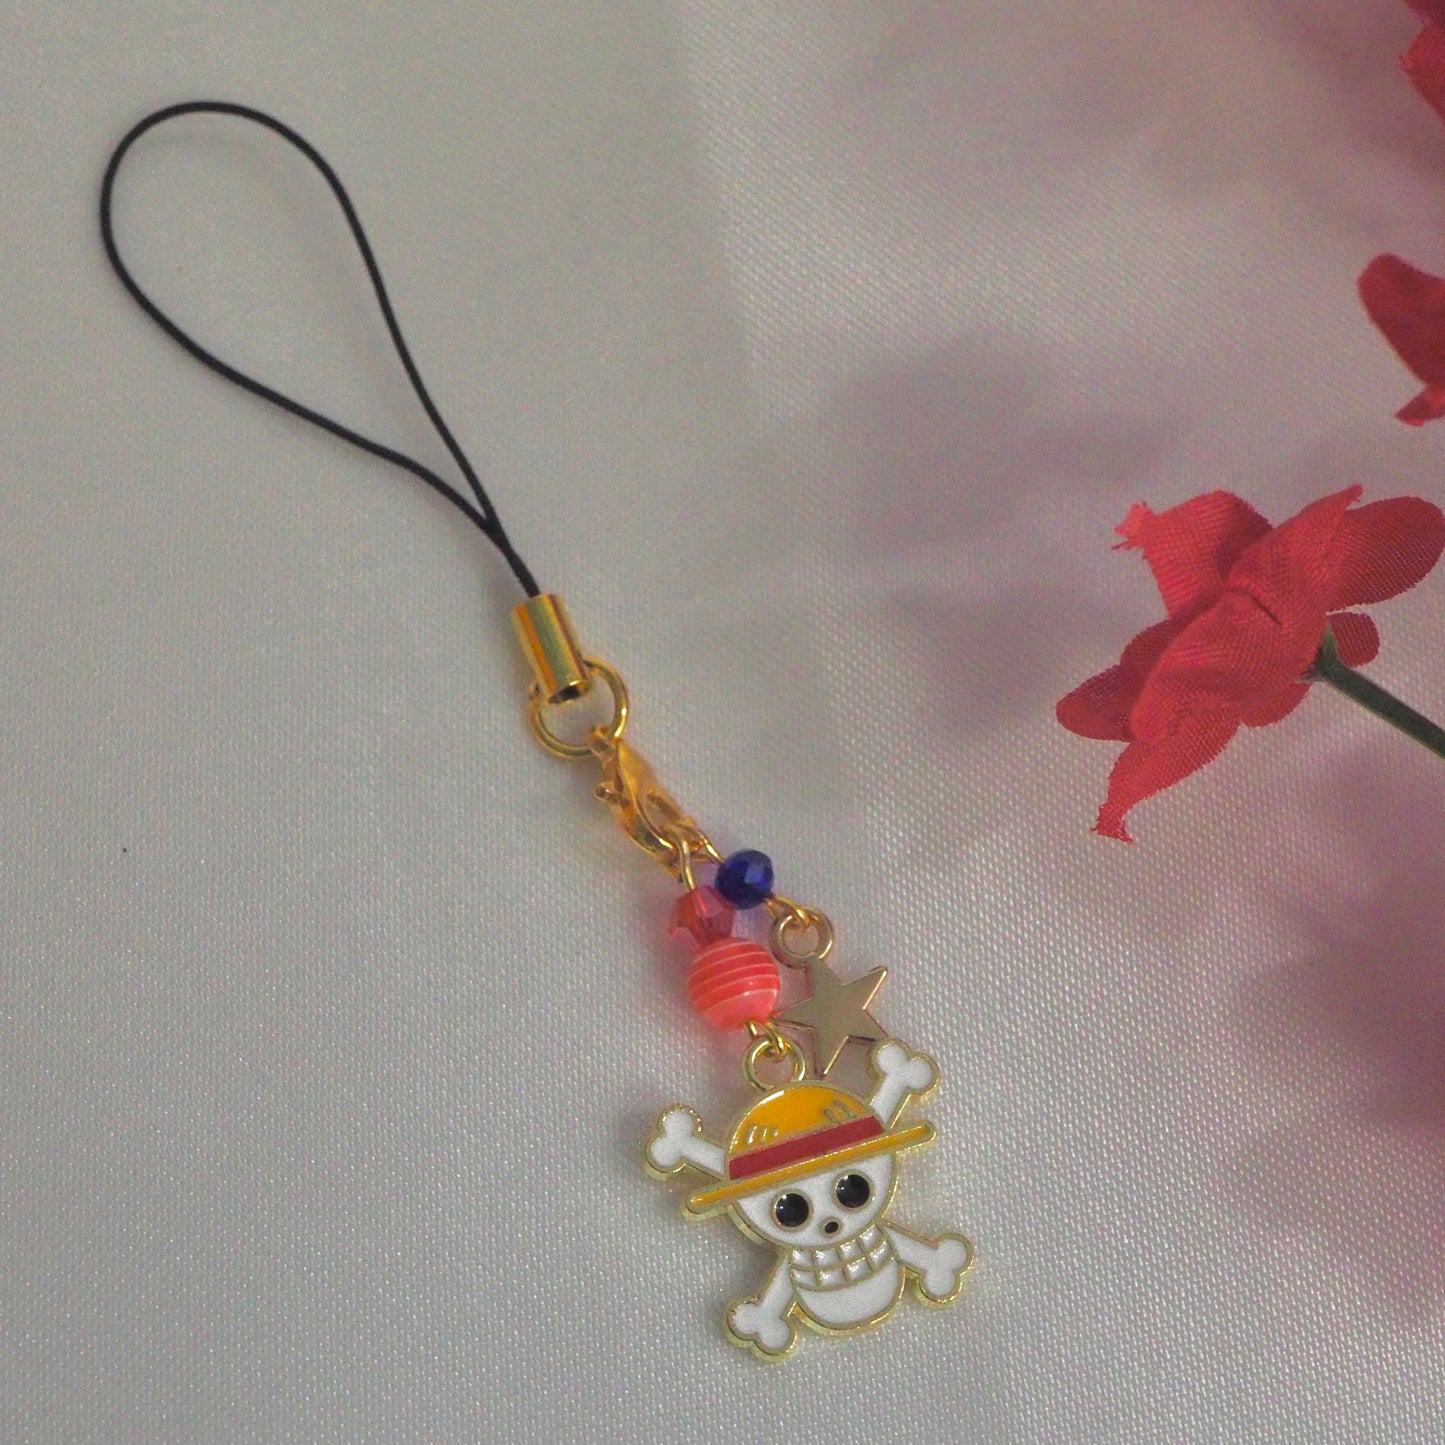 King of Pirates Phone Charm, OP anime inspired phone charm